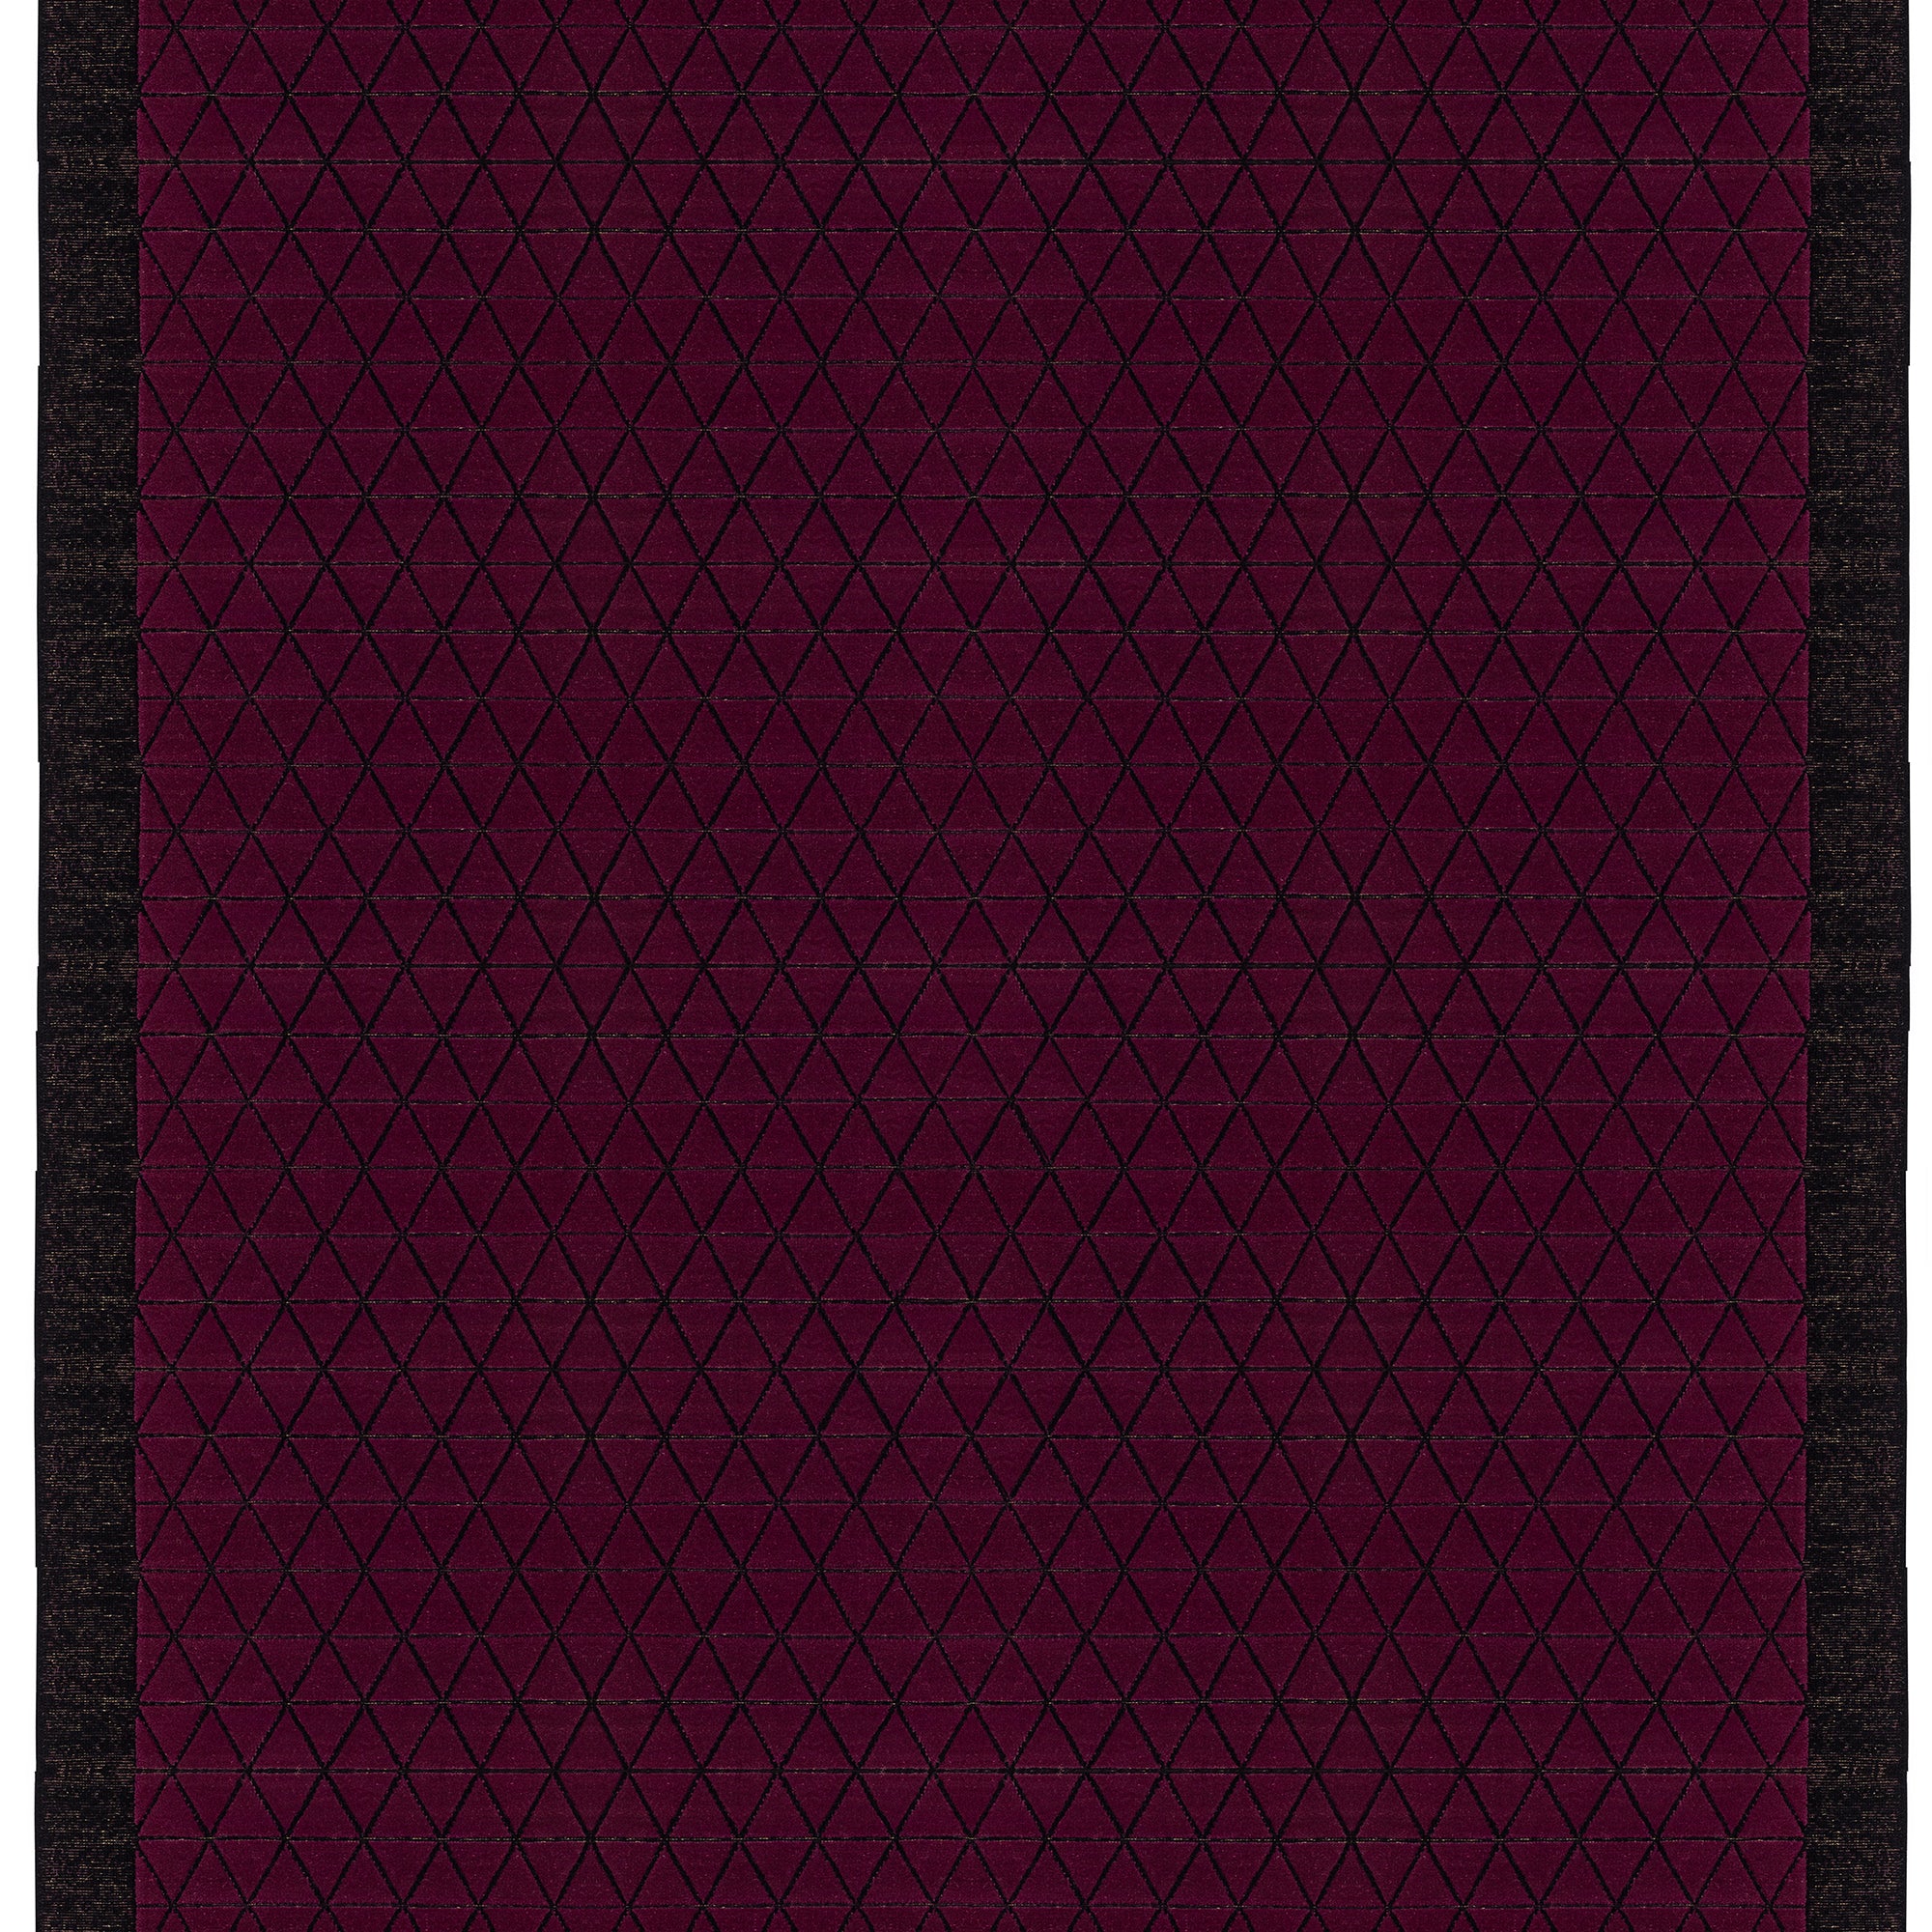 Full size Bucky Rug in berry, features a wide black border with a wine colored lattice field with a metallic sheen. 